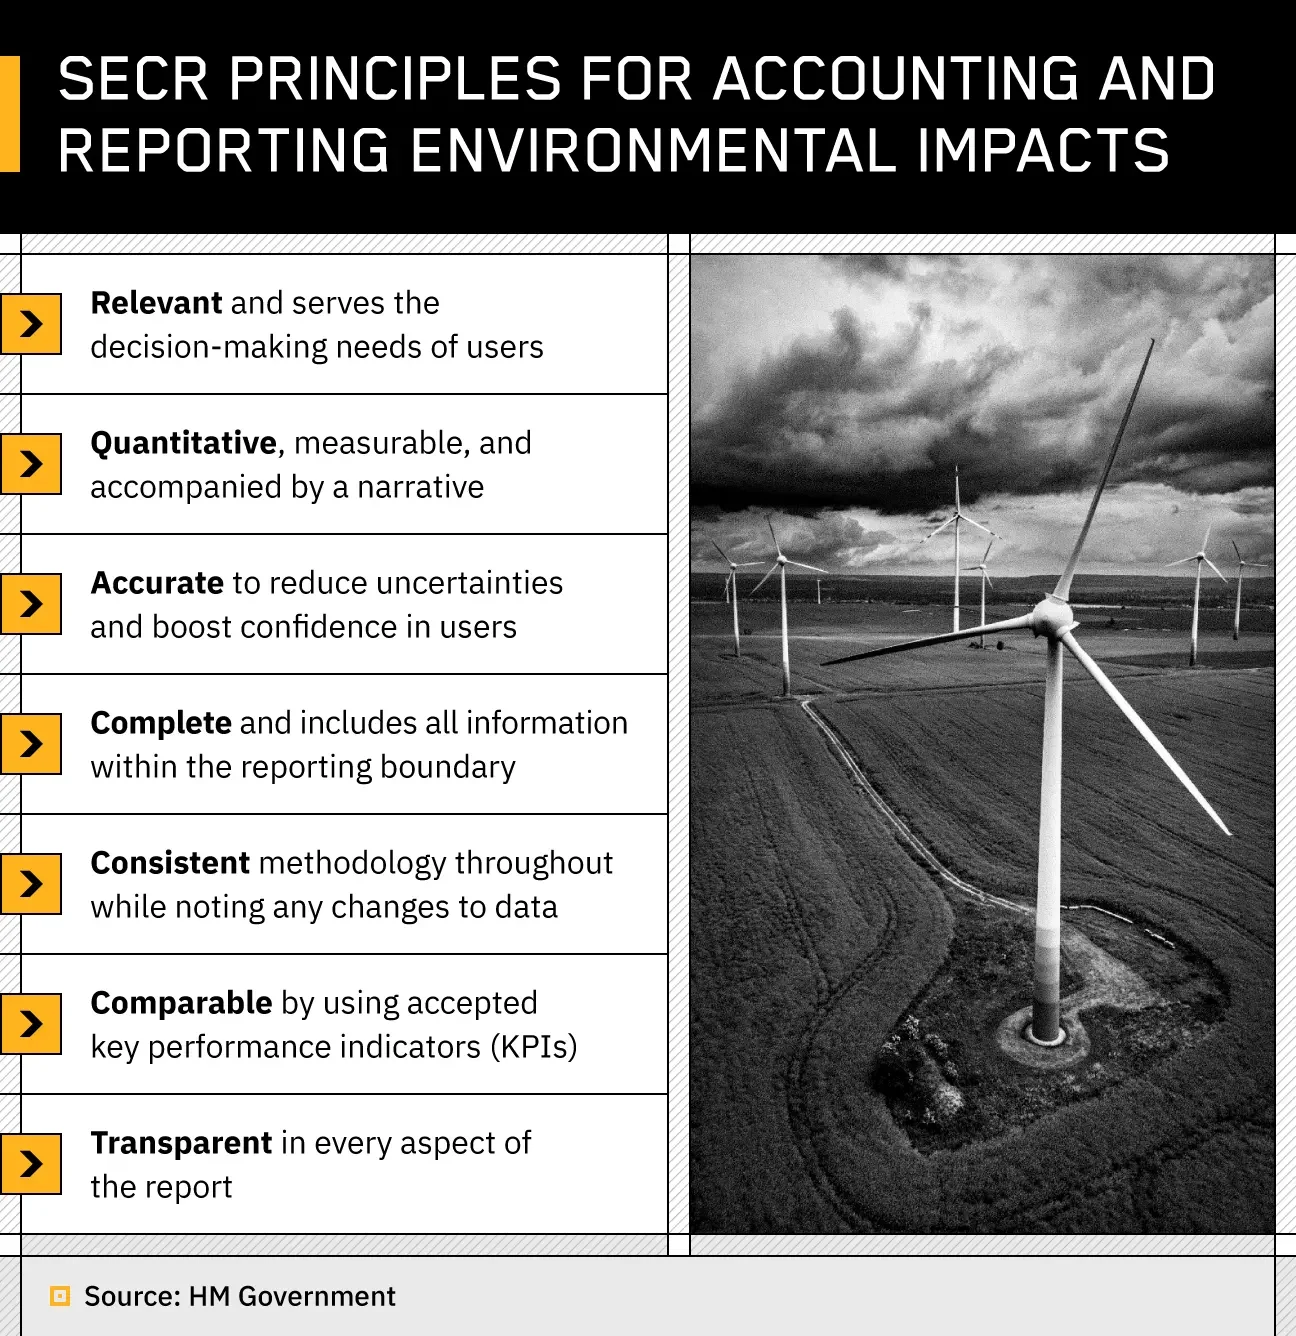 text summarizing SECR’s principles for accounting and reporting environmental impacts on the left and photo of wind turbines in a field on the right